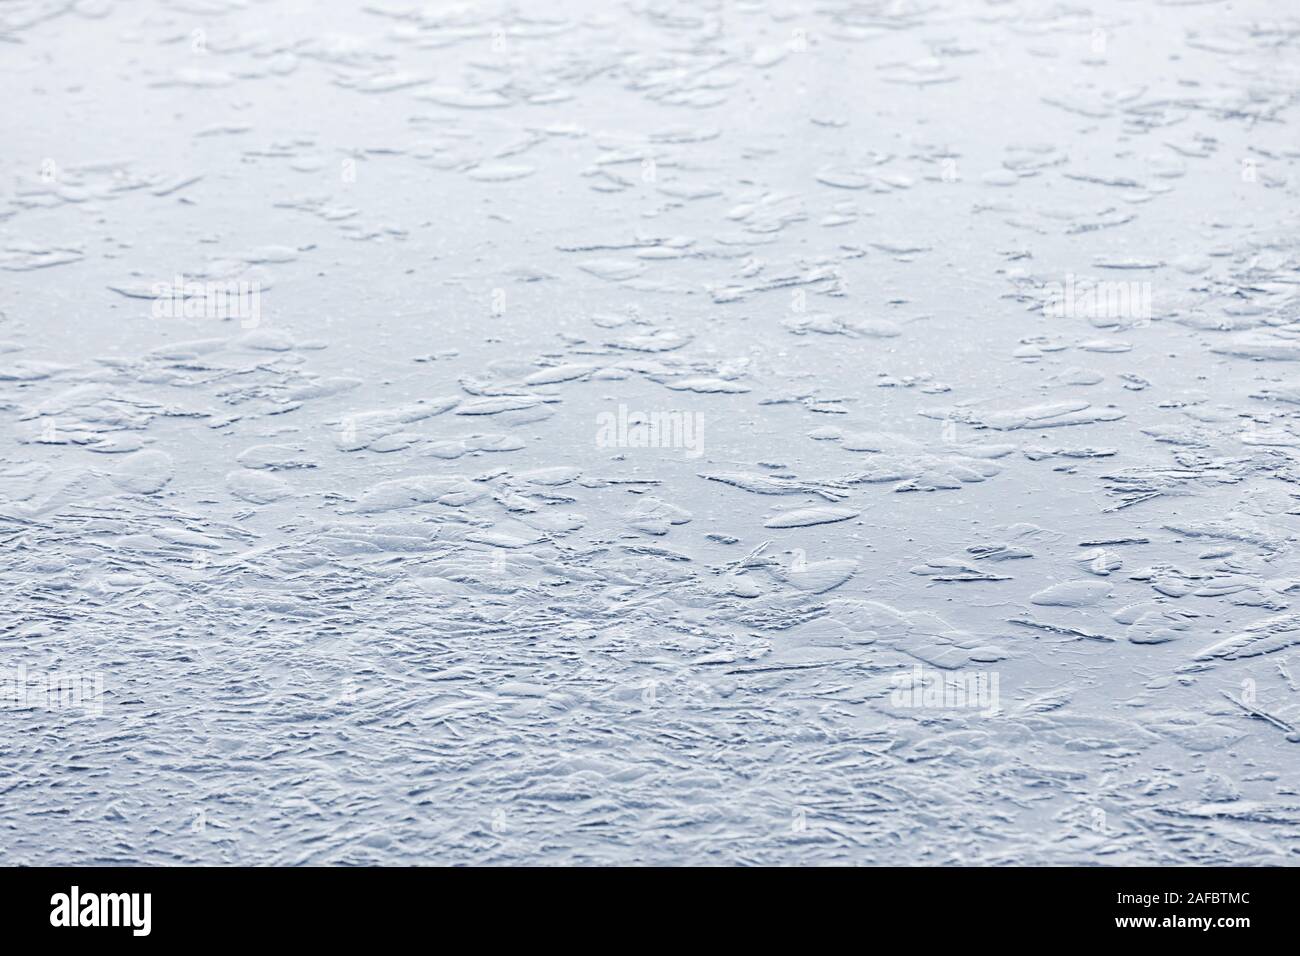 Abstract background of naturally textured frozen water surface Stock Photo